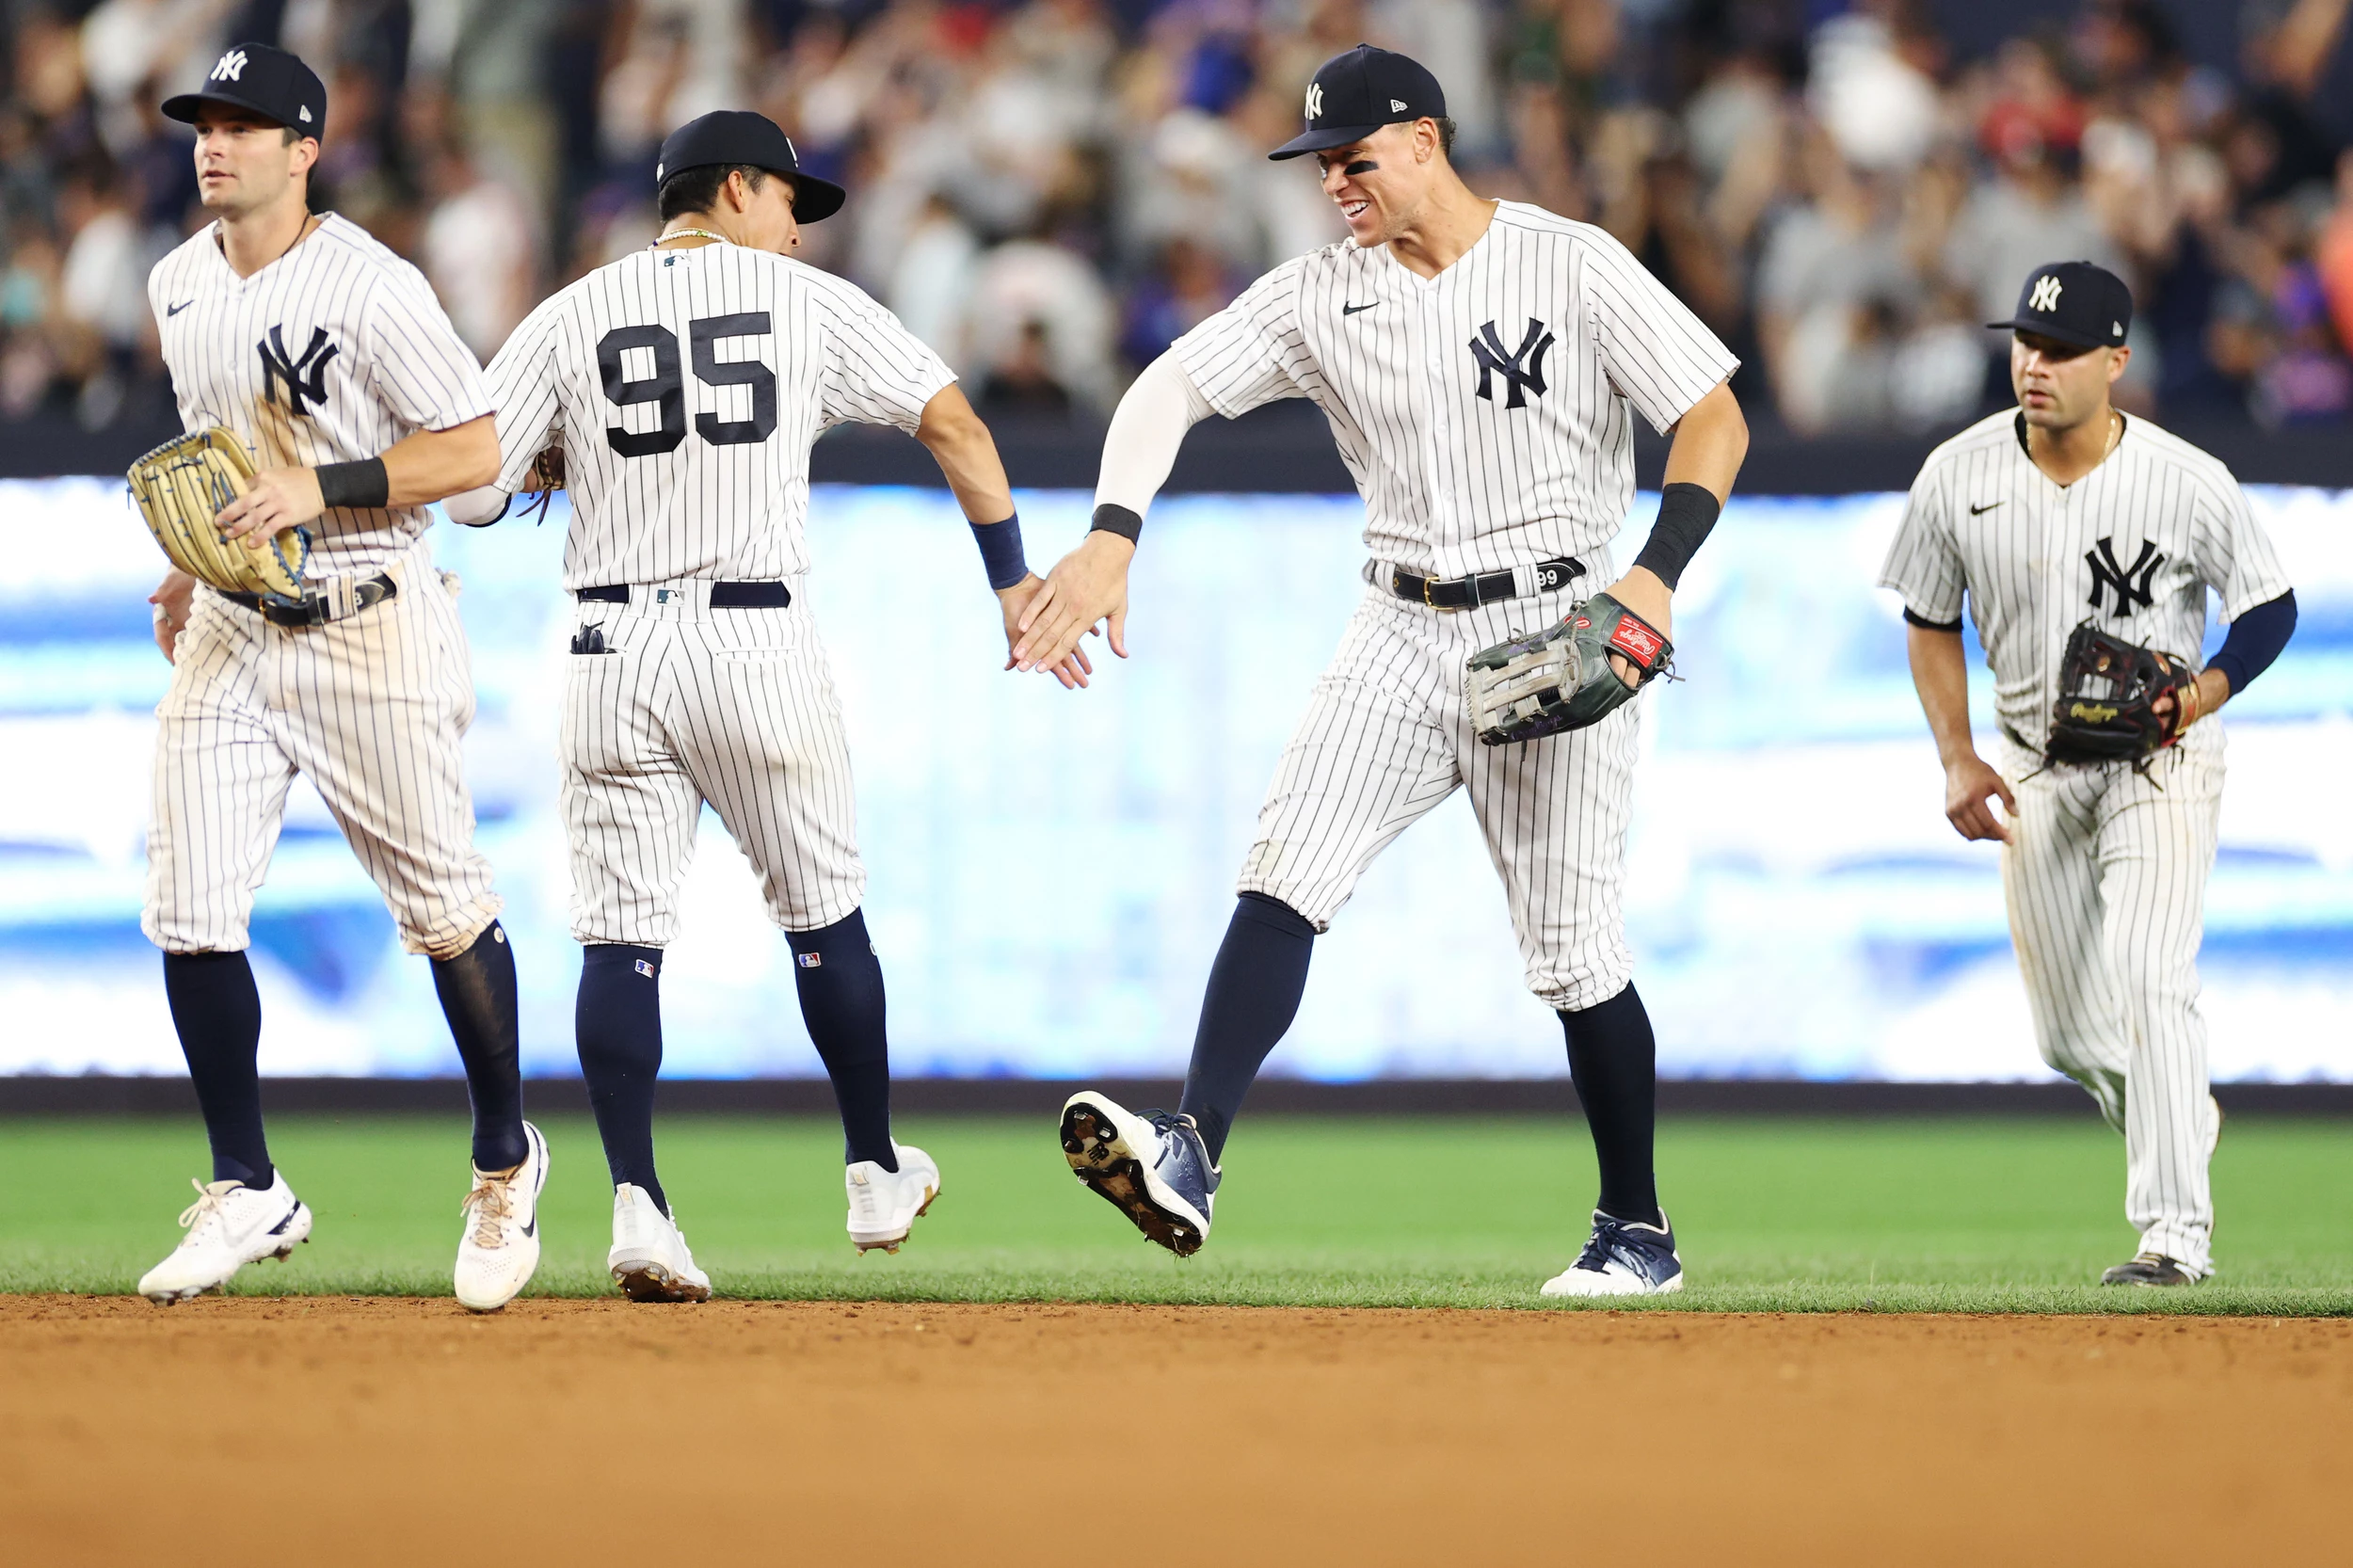 Gerrit Cole dominant as Yankees beat Mariners to end 4-game skid